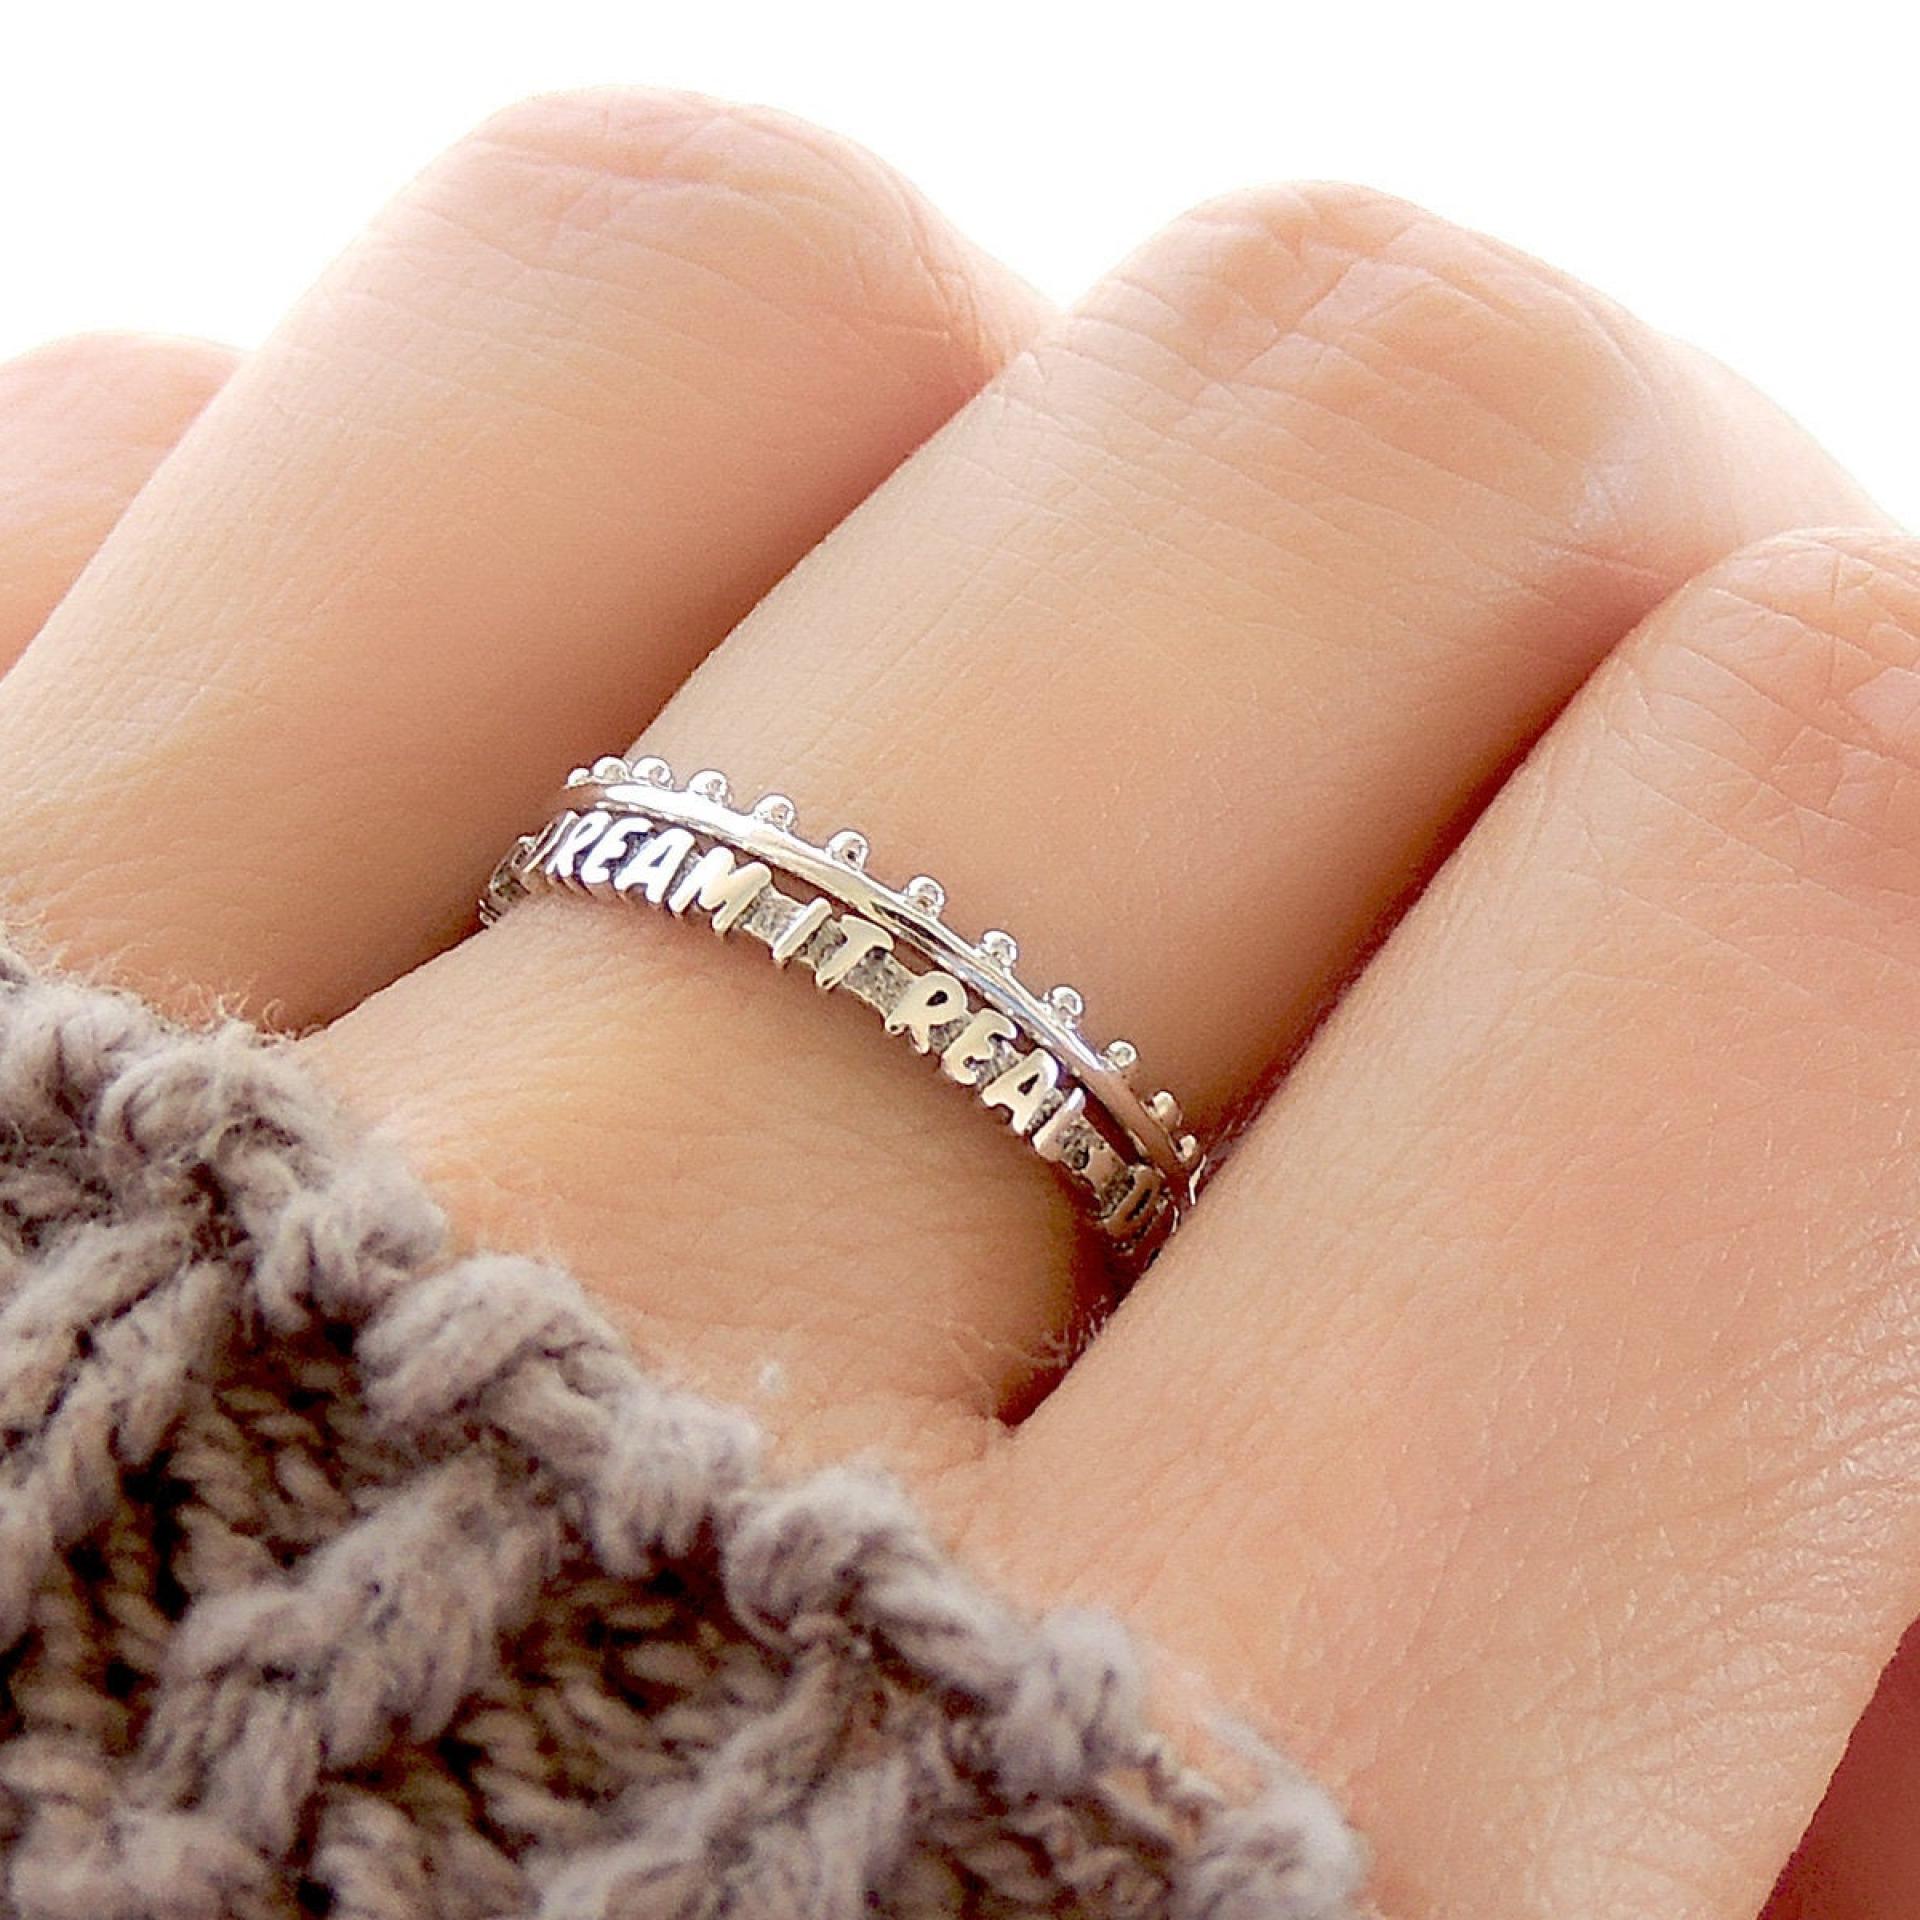 Dream it Real Motivational Mantra Ring